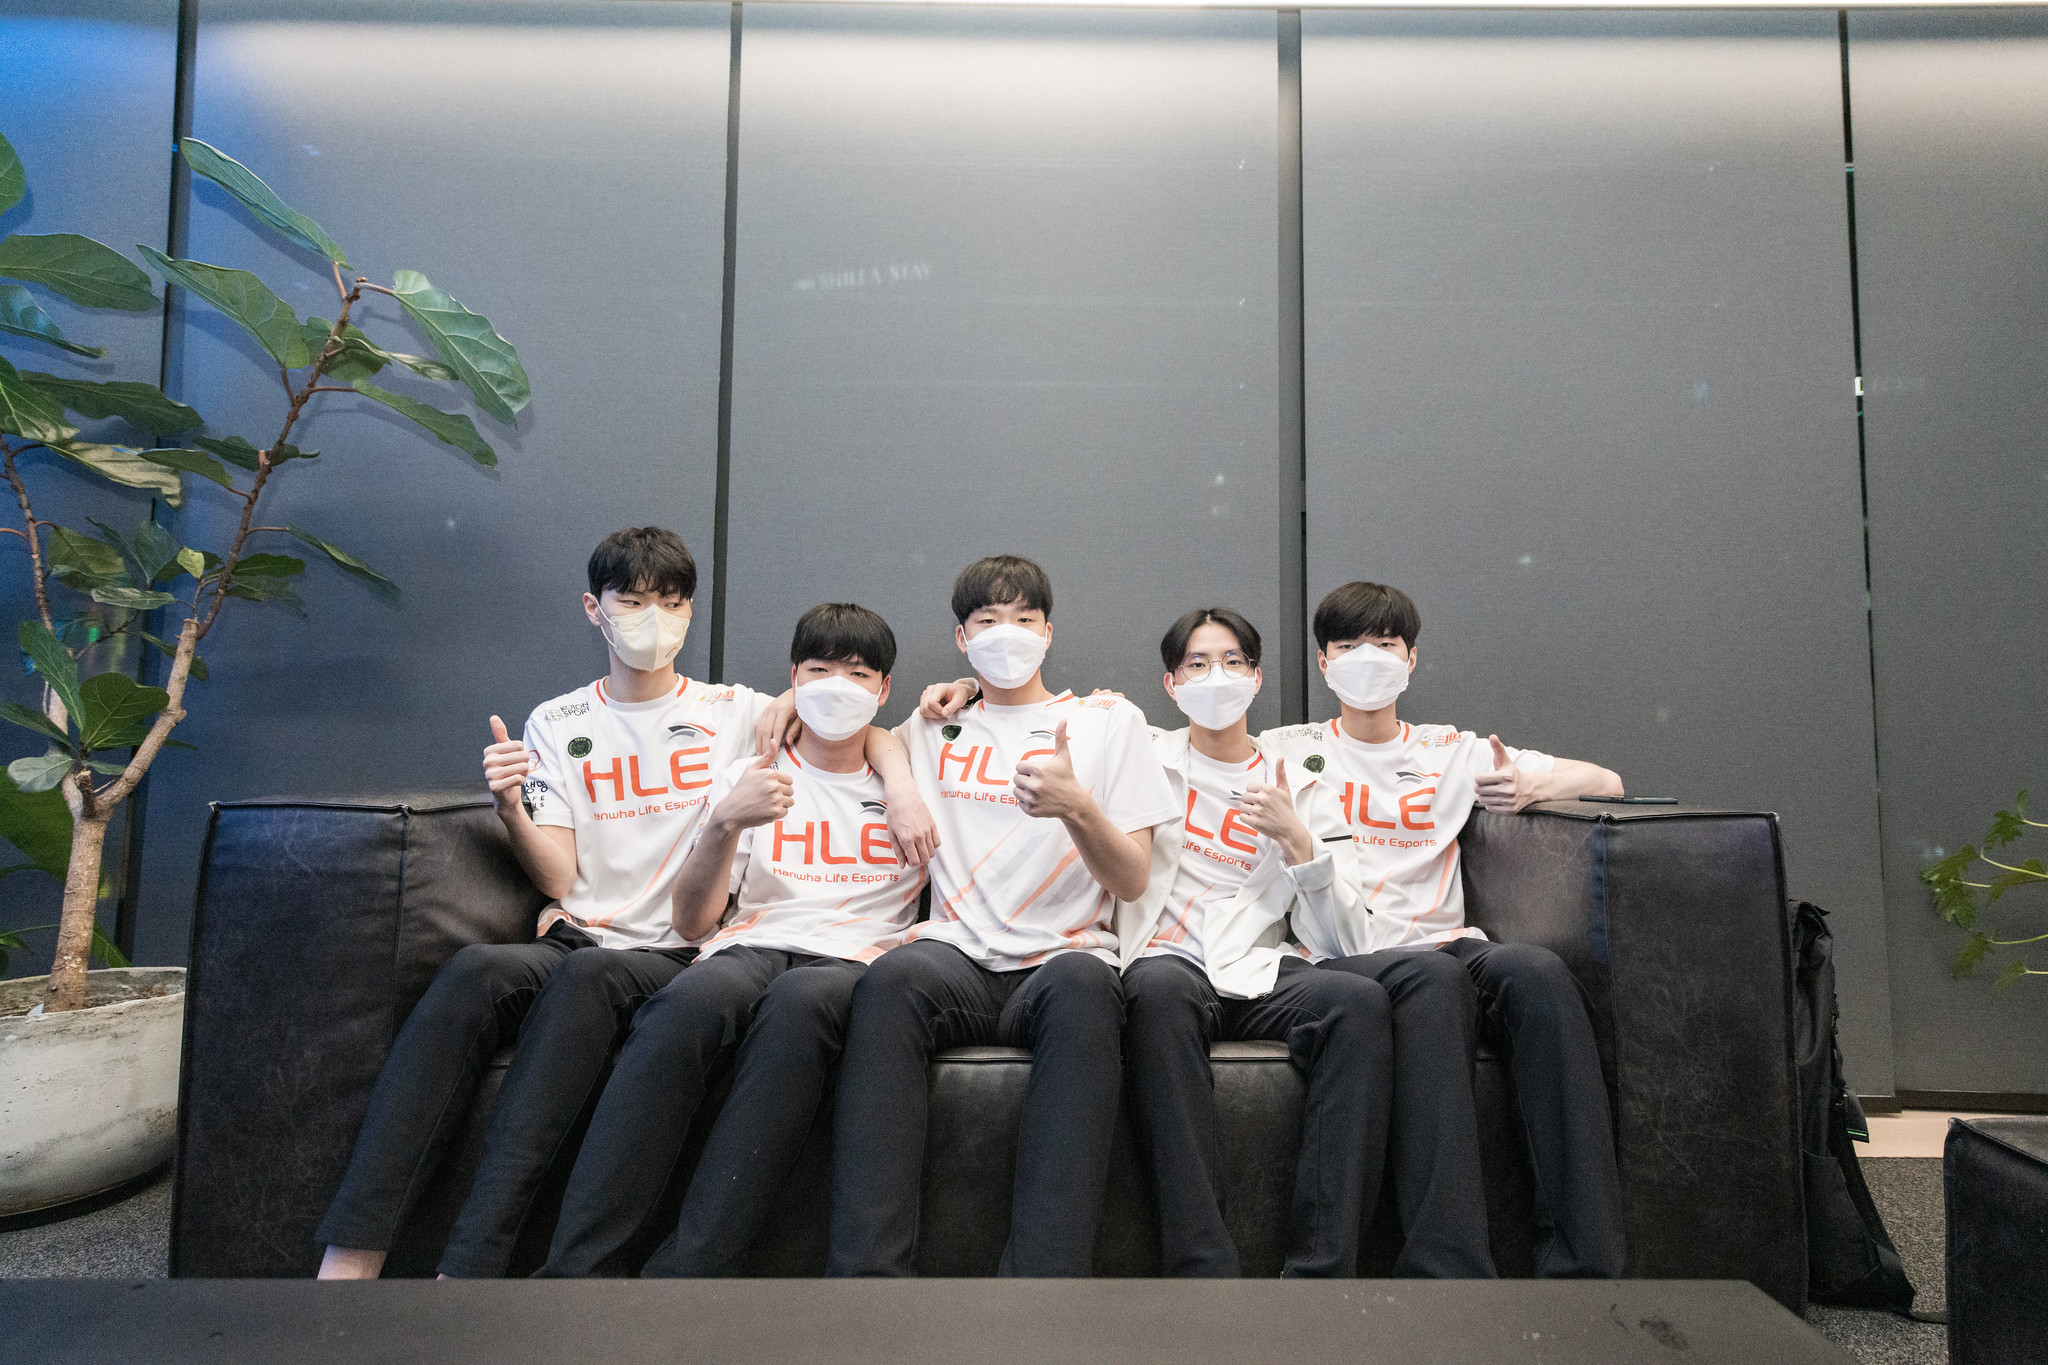 Hanwha Life Esports qualify for 2021 World Championship following sweep of Nongshim in LCK Regional Finals